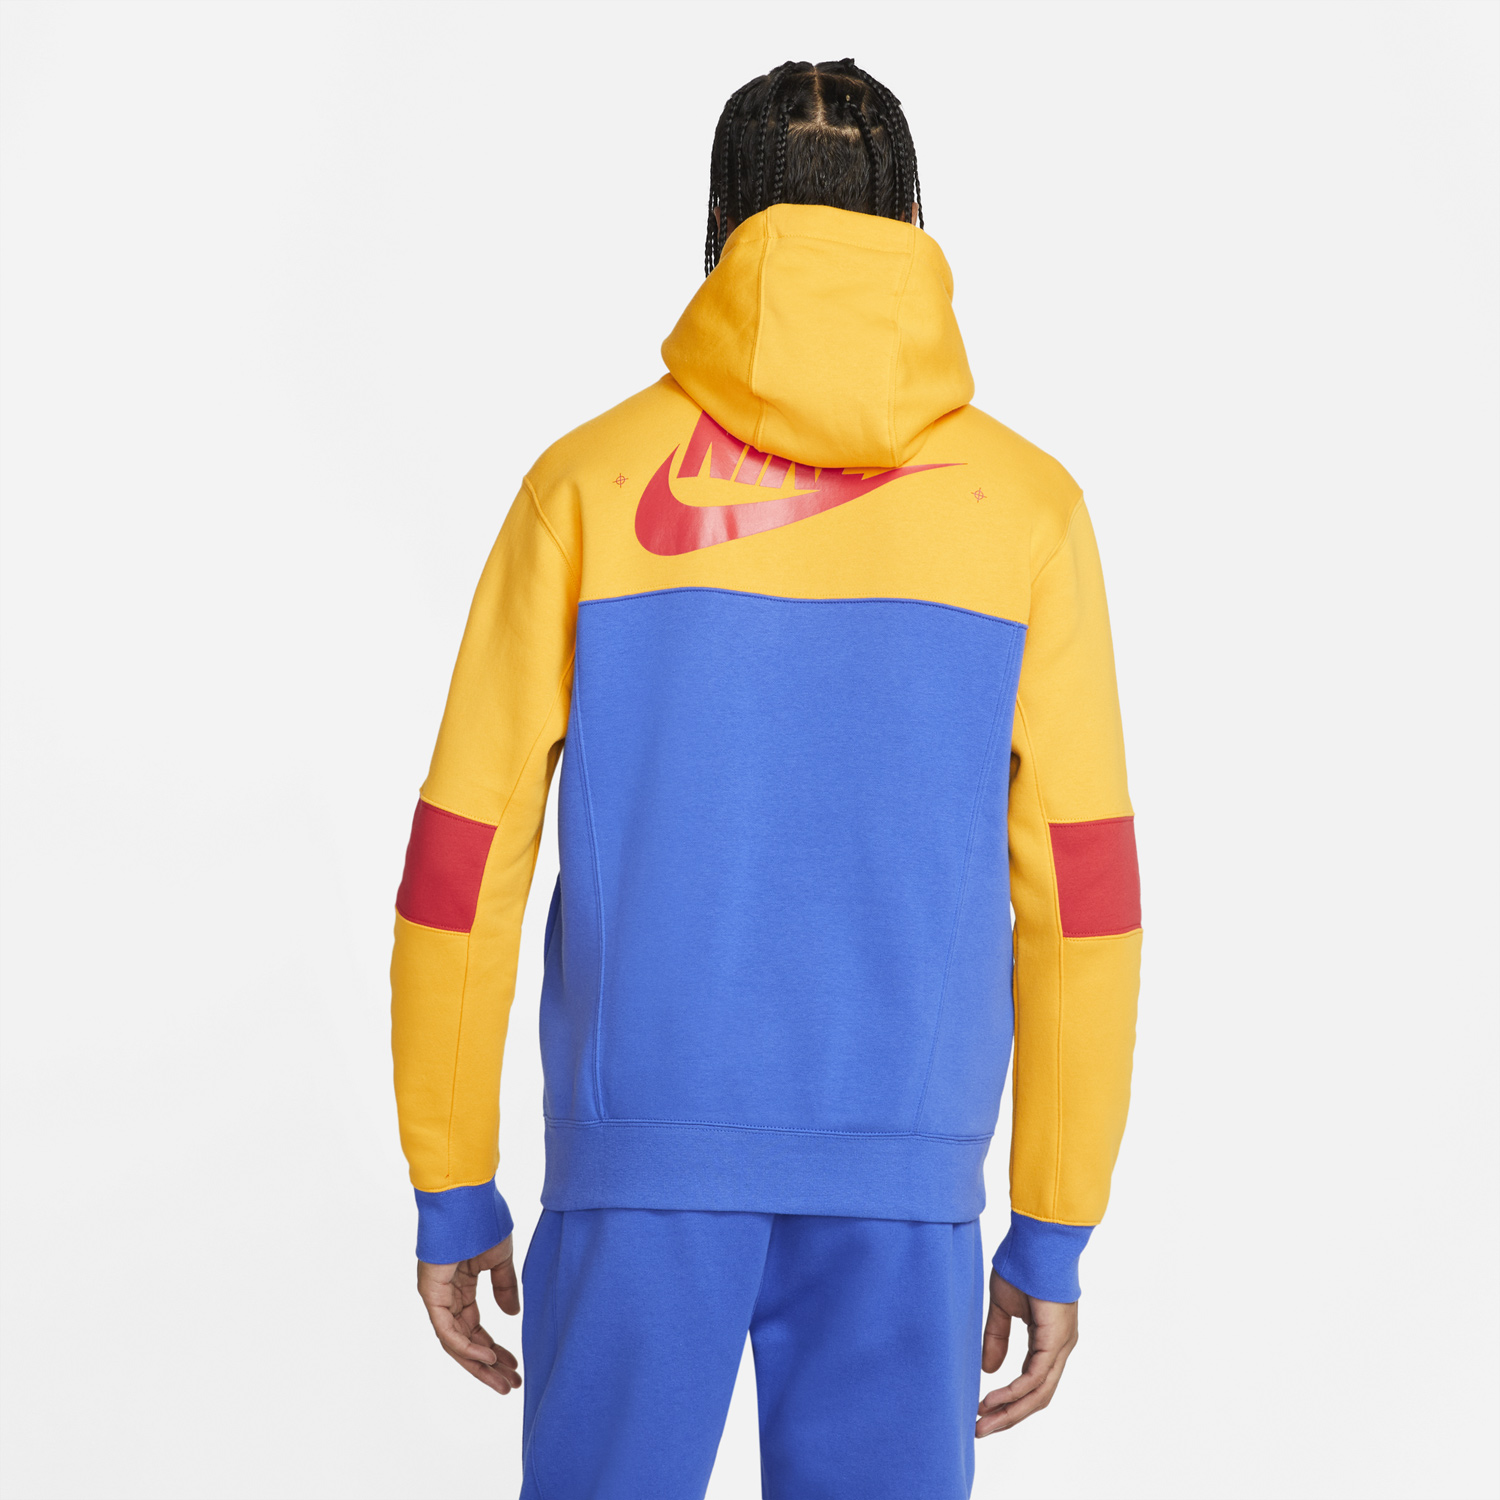 nike-alter-and-reveal-hoodie-yellow-red-blue-2